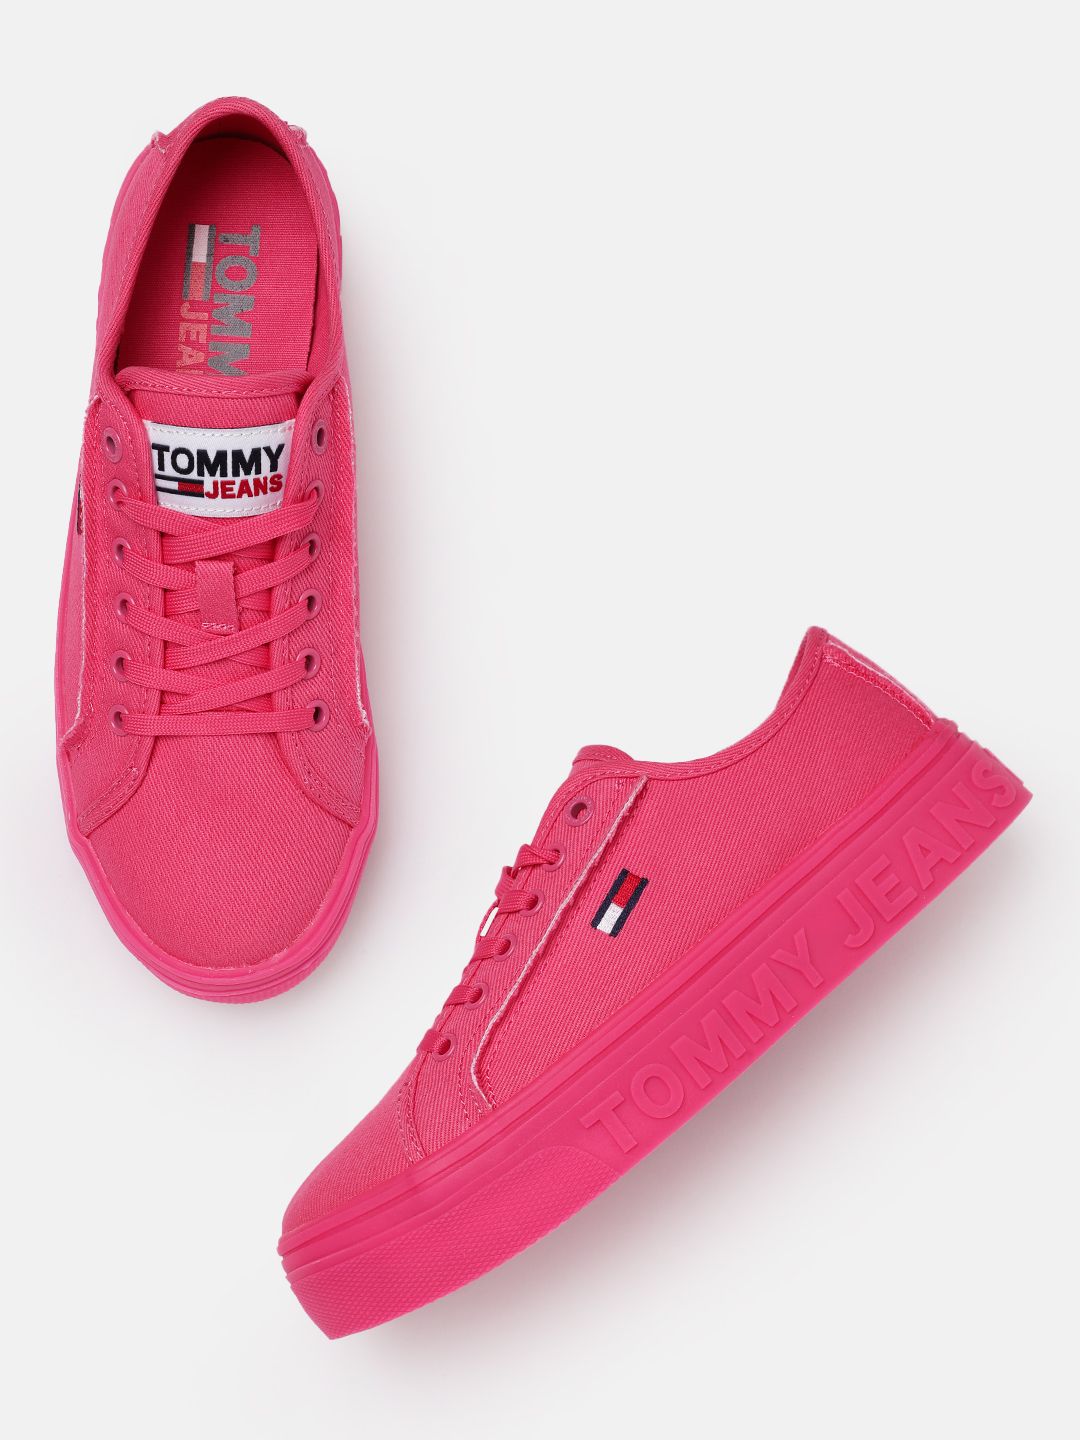 Tommy Hilfiger Women Pink Solid Sneakers Price in India